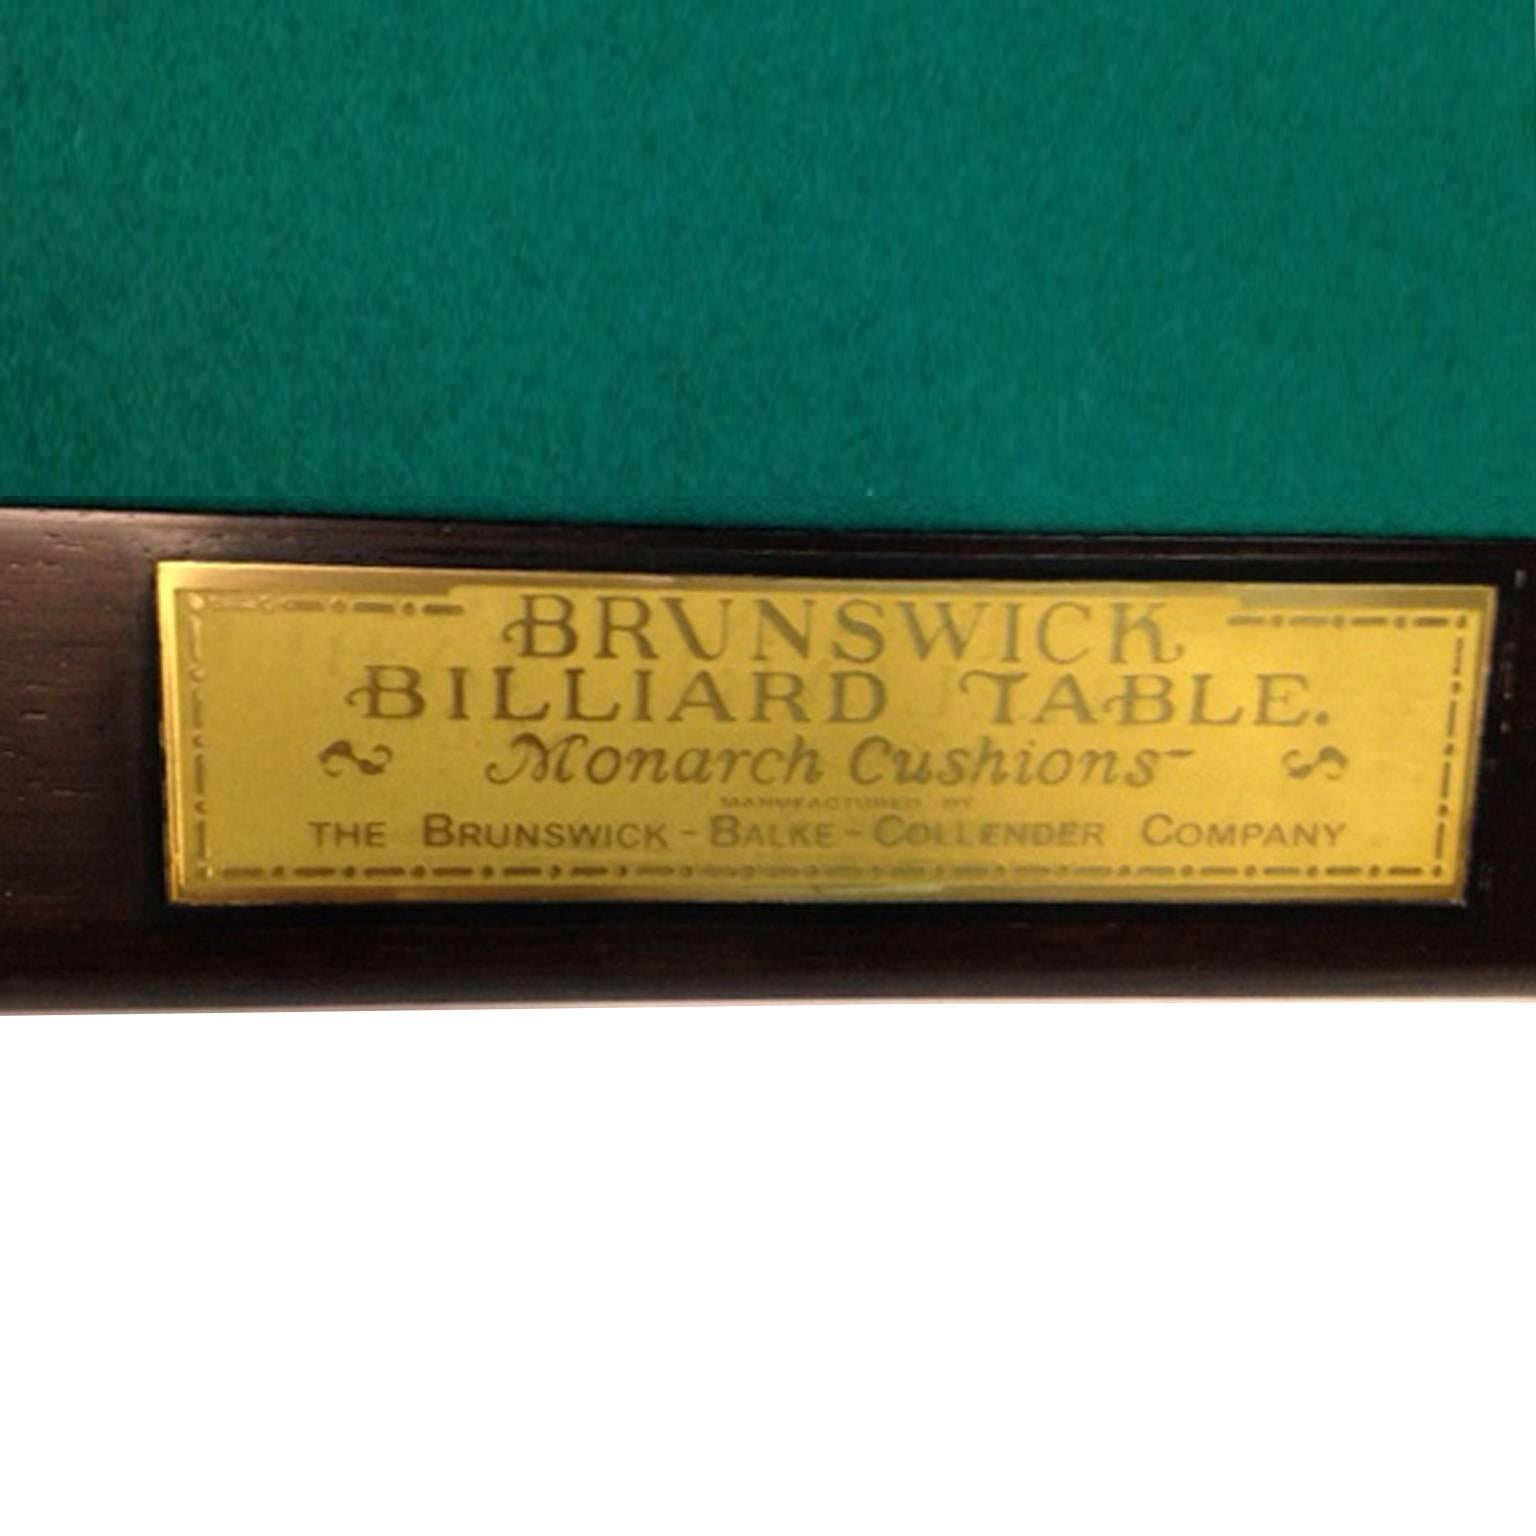 Has ball return, (4) legs, 60 inches x 100 inches playing area.
Good, restored condition. At Blatt Billiards. 
Buyer must inspect, no returns. Arts and crafts style. Will be delivered by Blatt Billiards, buyer to make arrangements.

Architect, Sandy